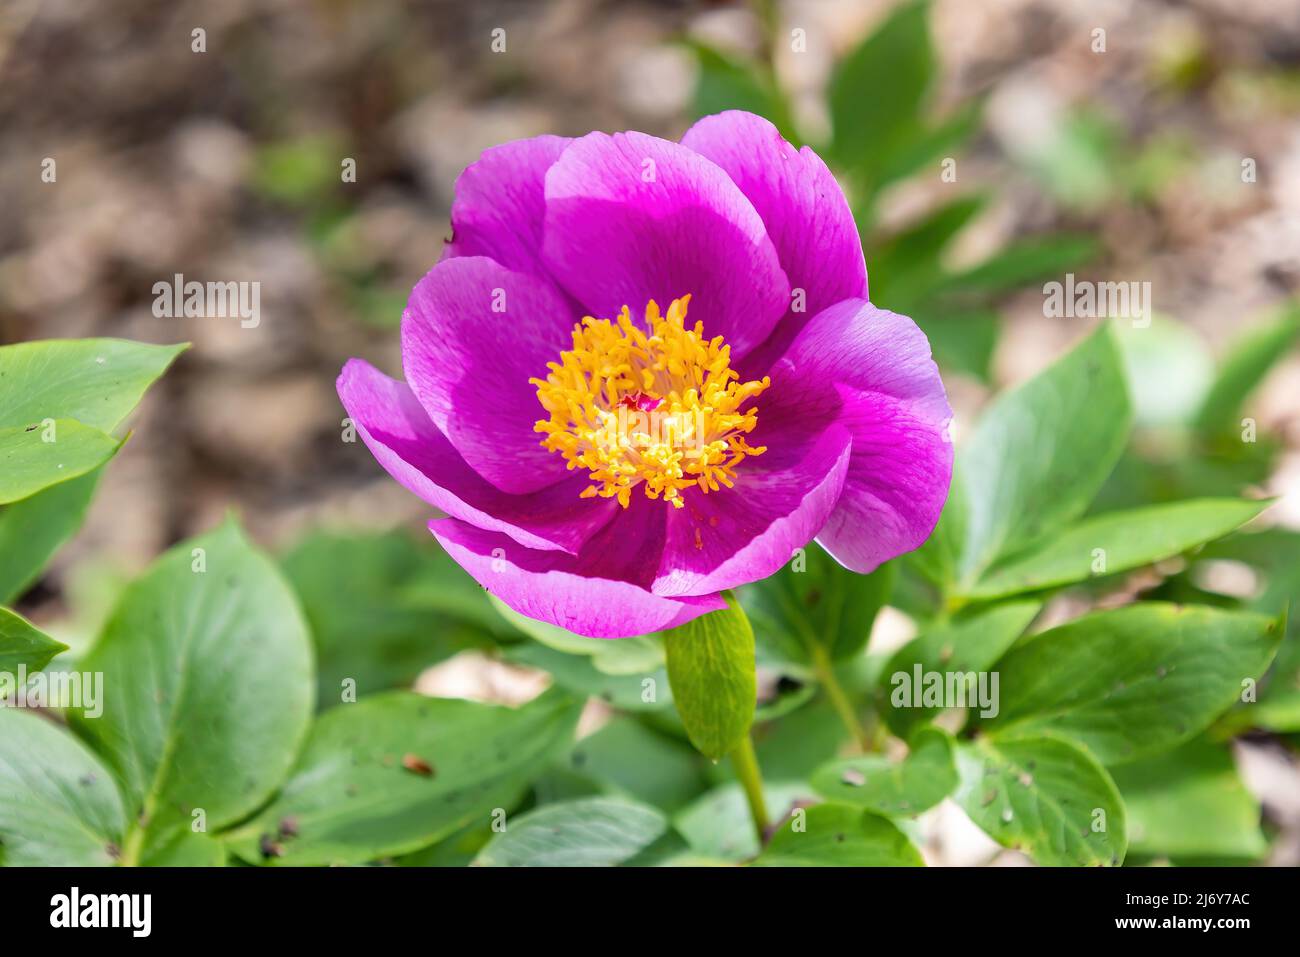 Paeonia broteri Boiss. & Reut is a perennial, herbaceous species of peony. It is an endemic species of Spain and Portugal. It bears rose-pink flowers Stock Photo